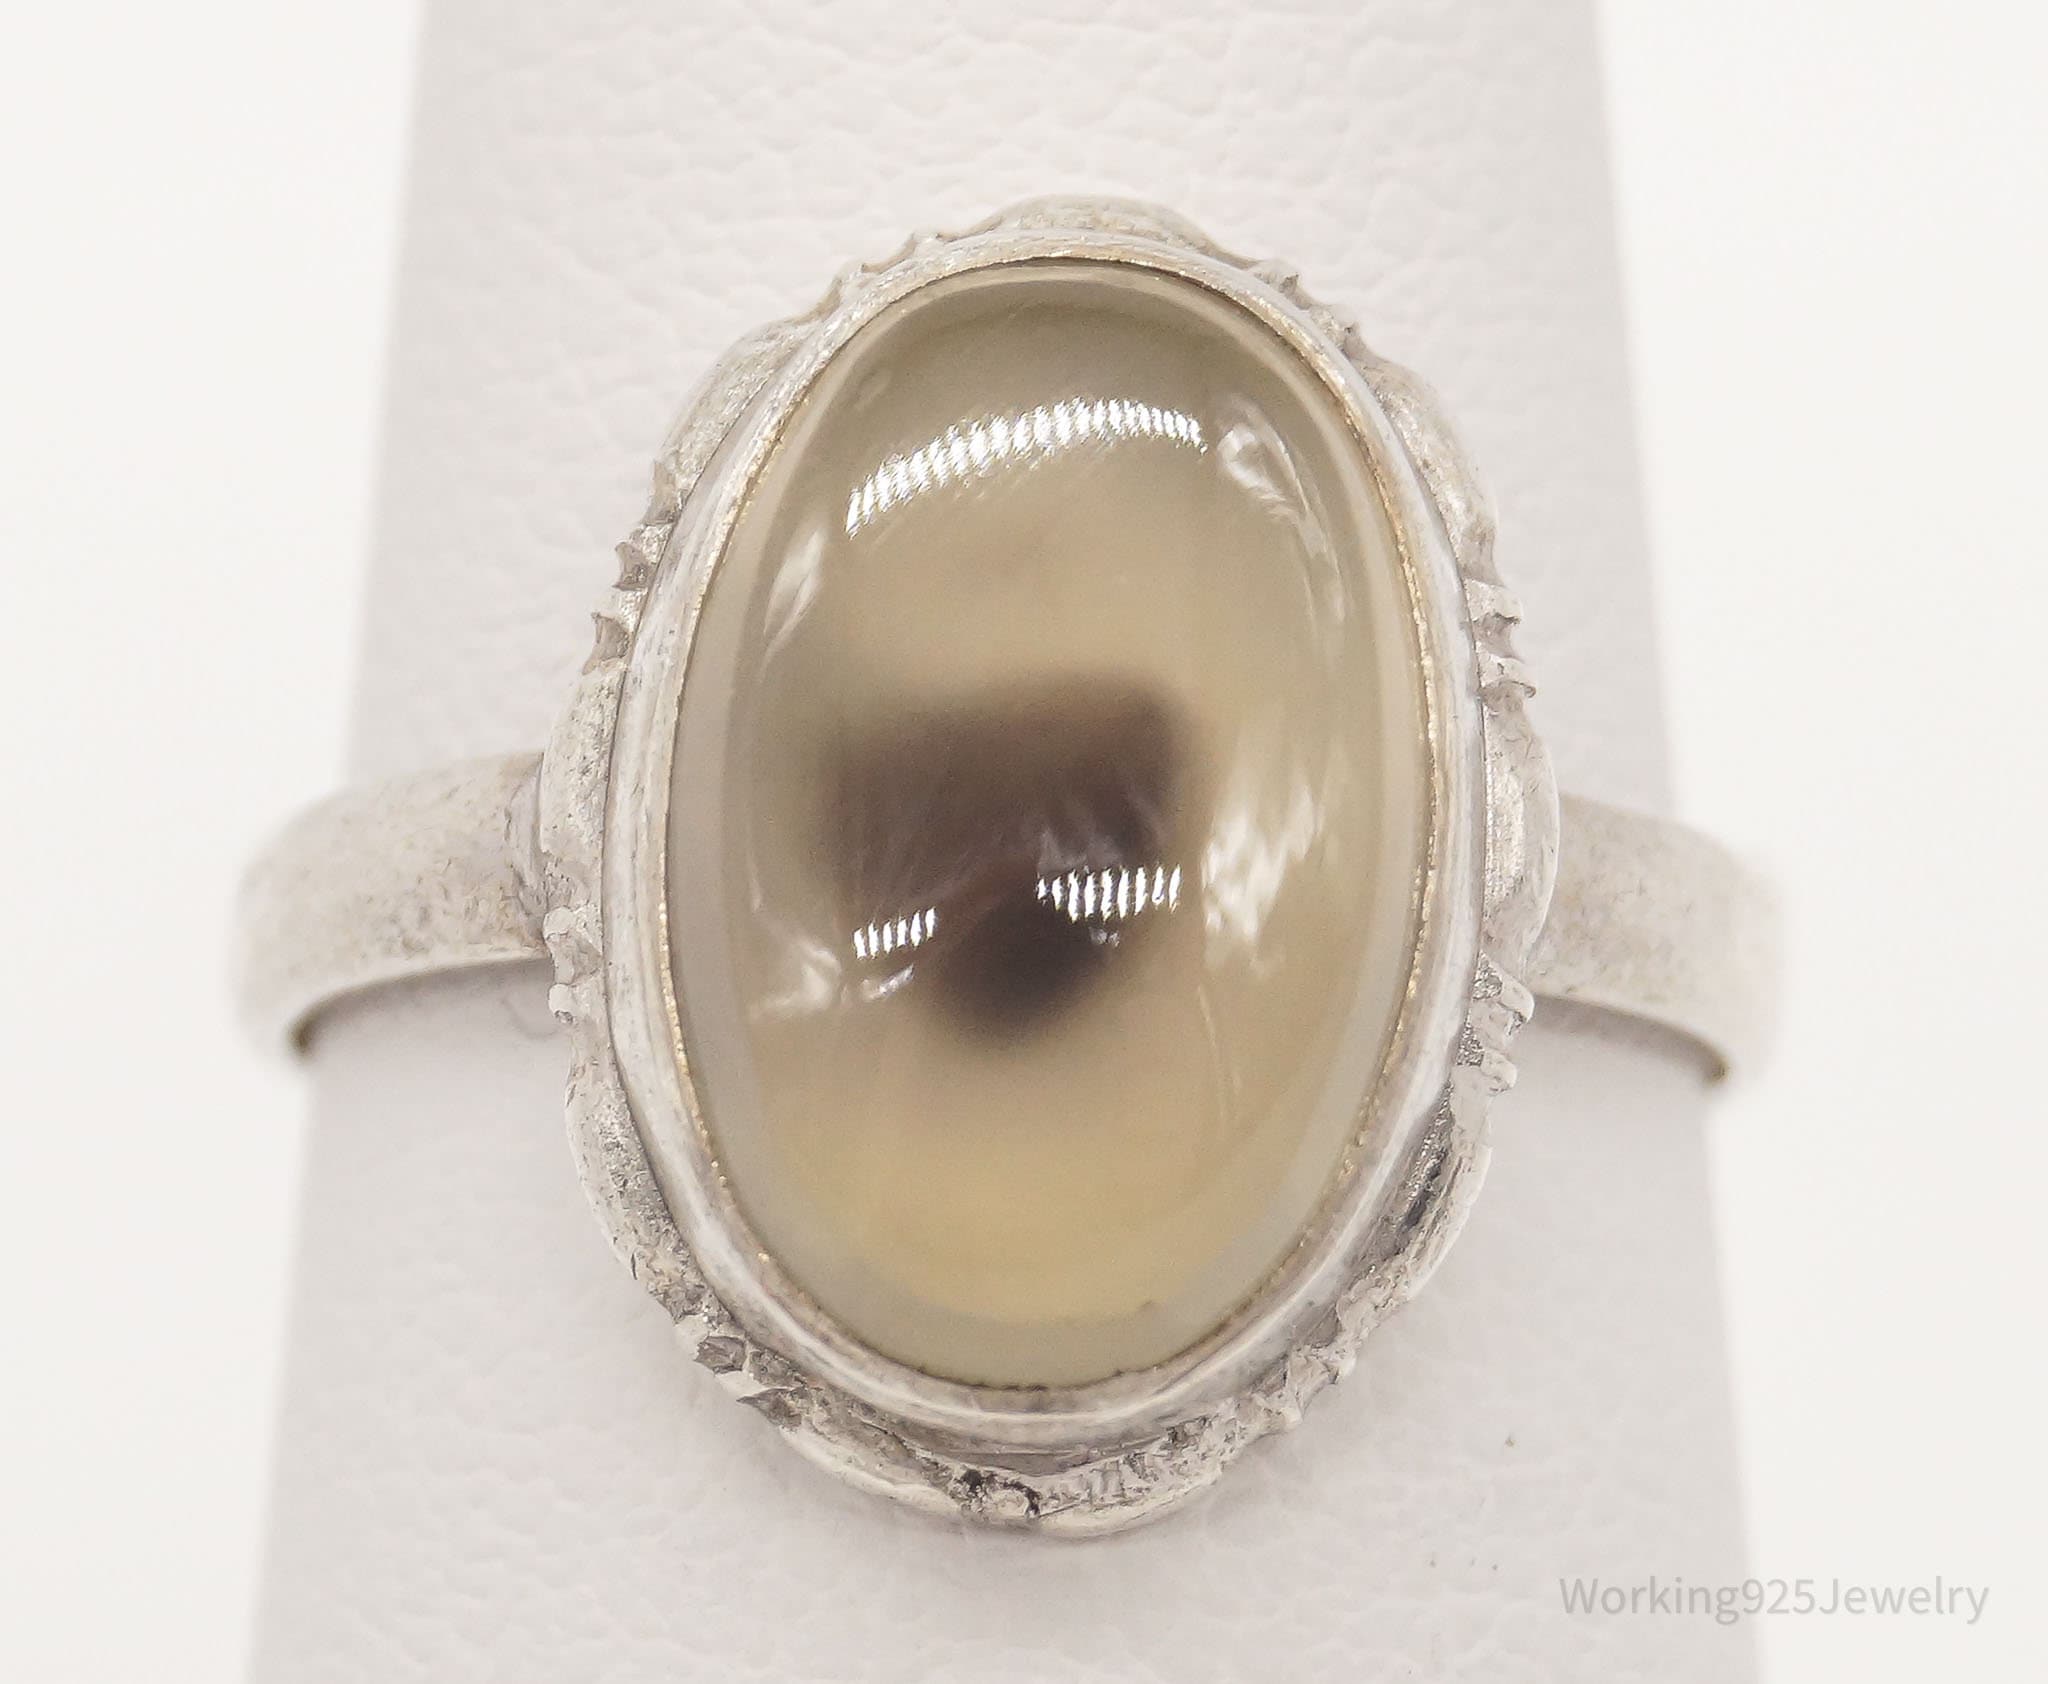 Antique Agate Sterling Silver Ring Size 5.75